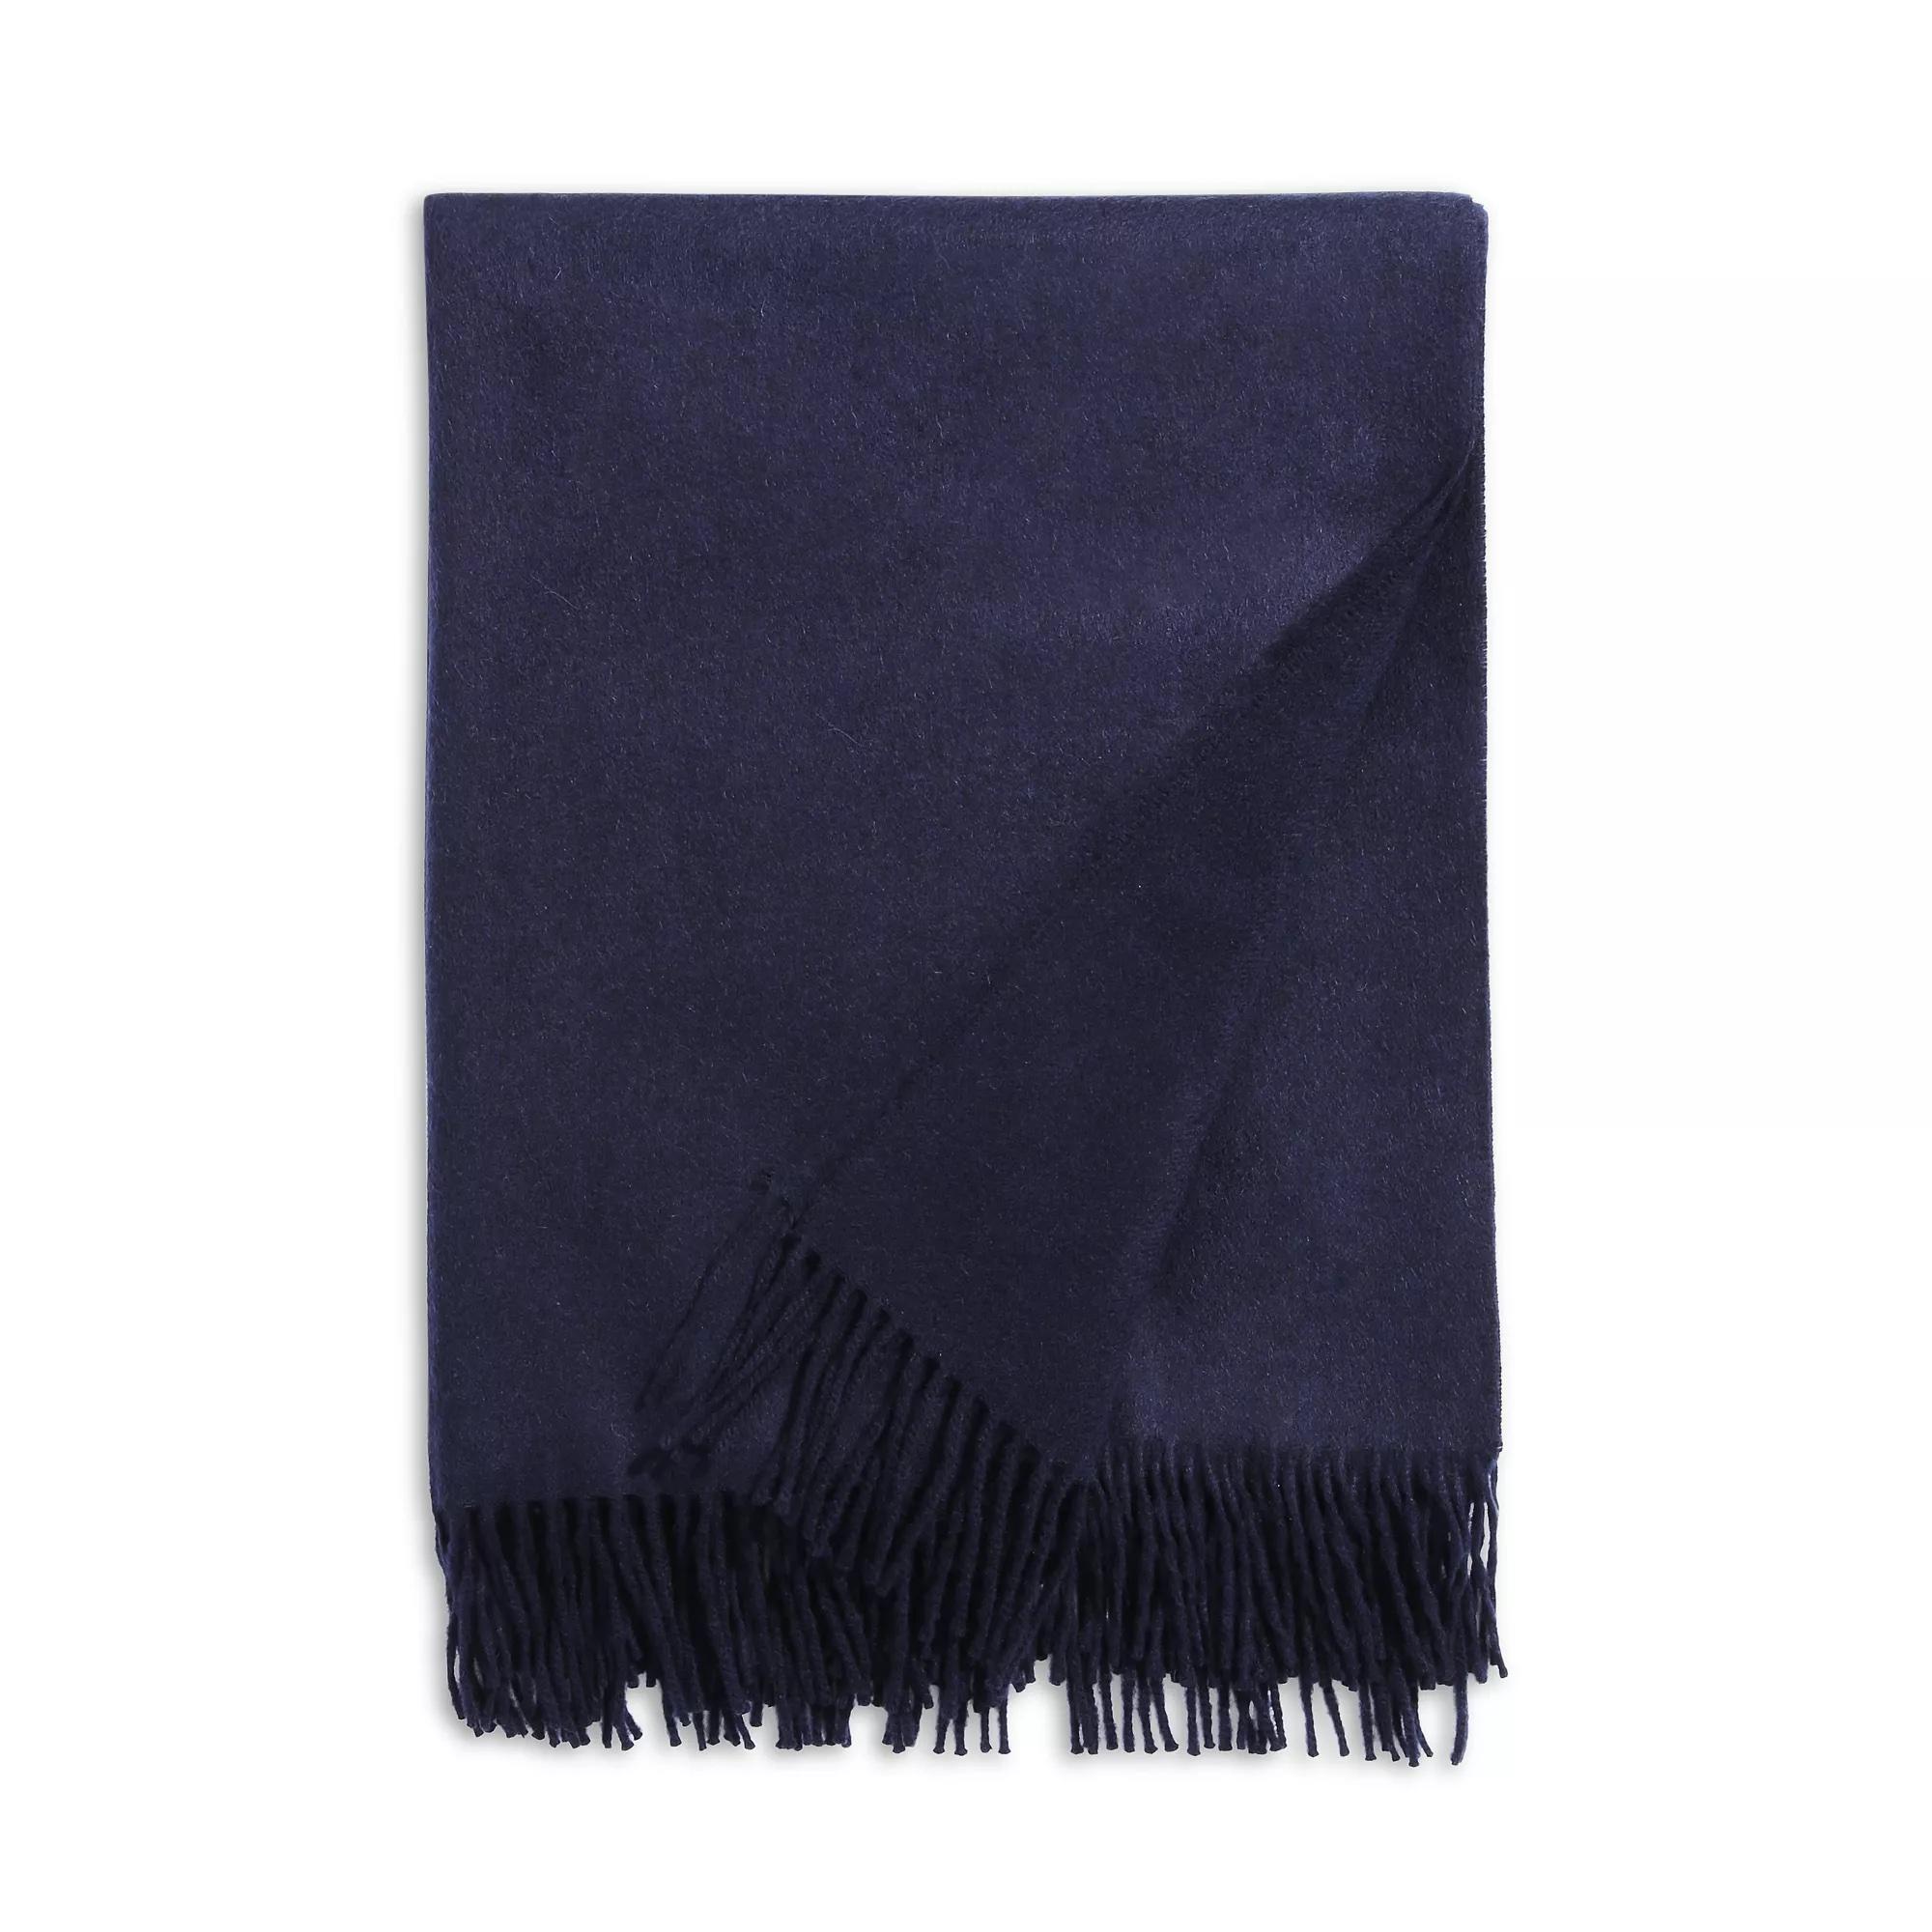 Amicale 100% Cashmere Throw 